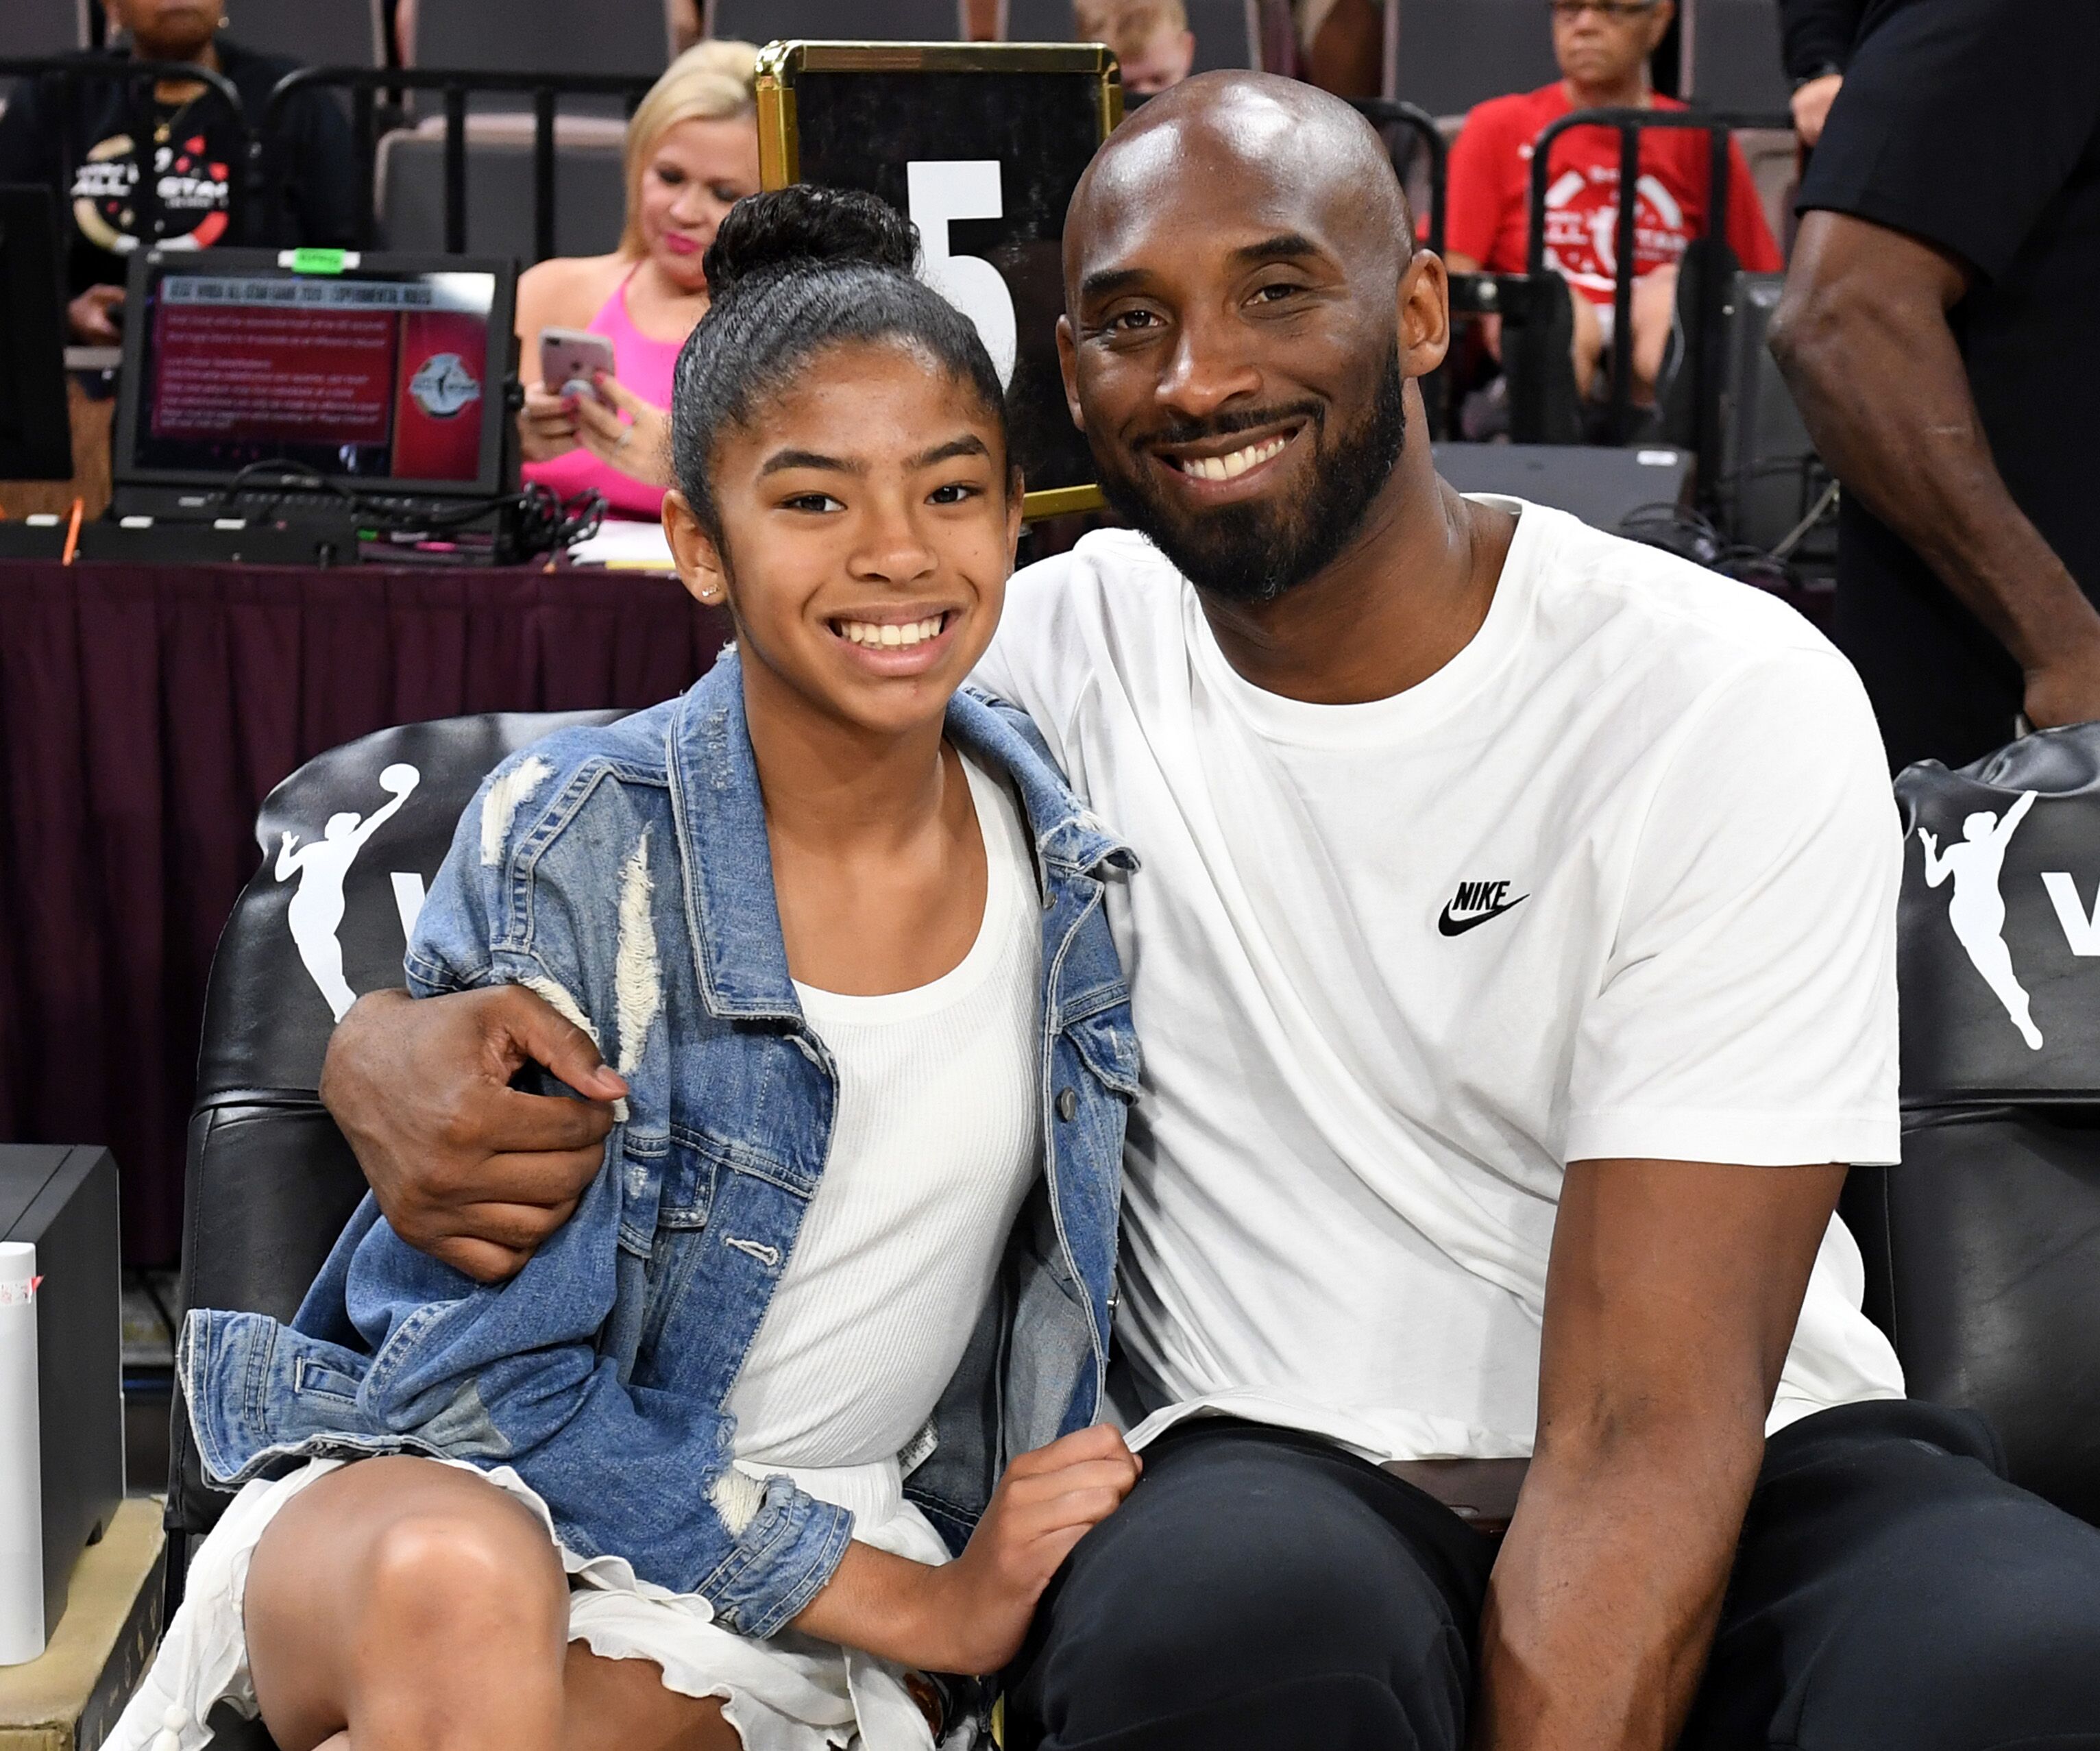 Gianna Bryant and Kobe Bryant at the WNBA All-Star Game 2019 on July 27, 2019 in Nevada | Photo: Getty Images.